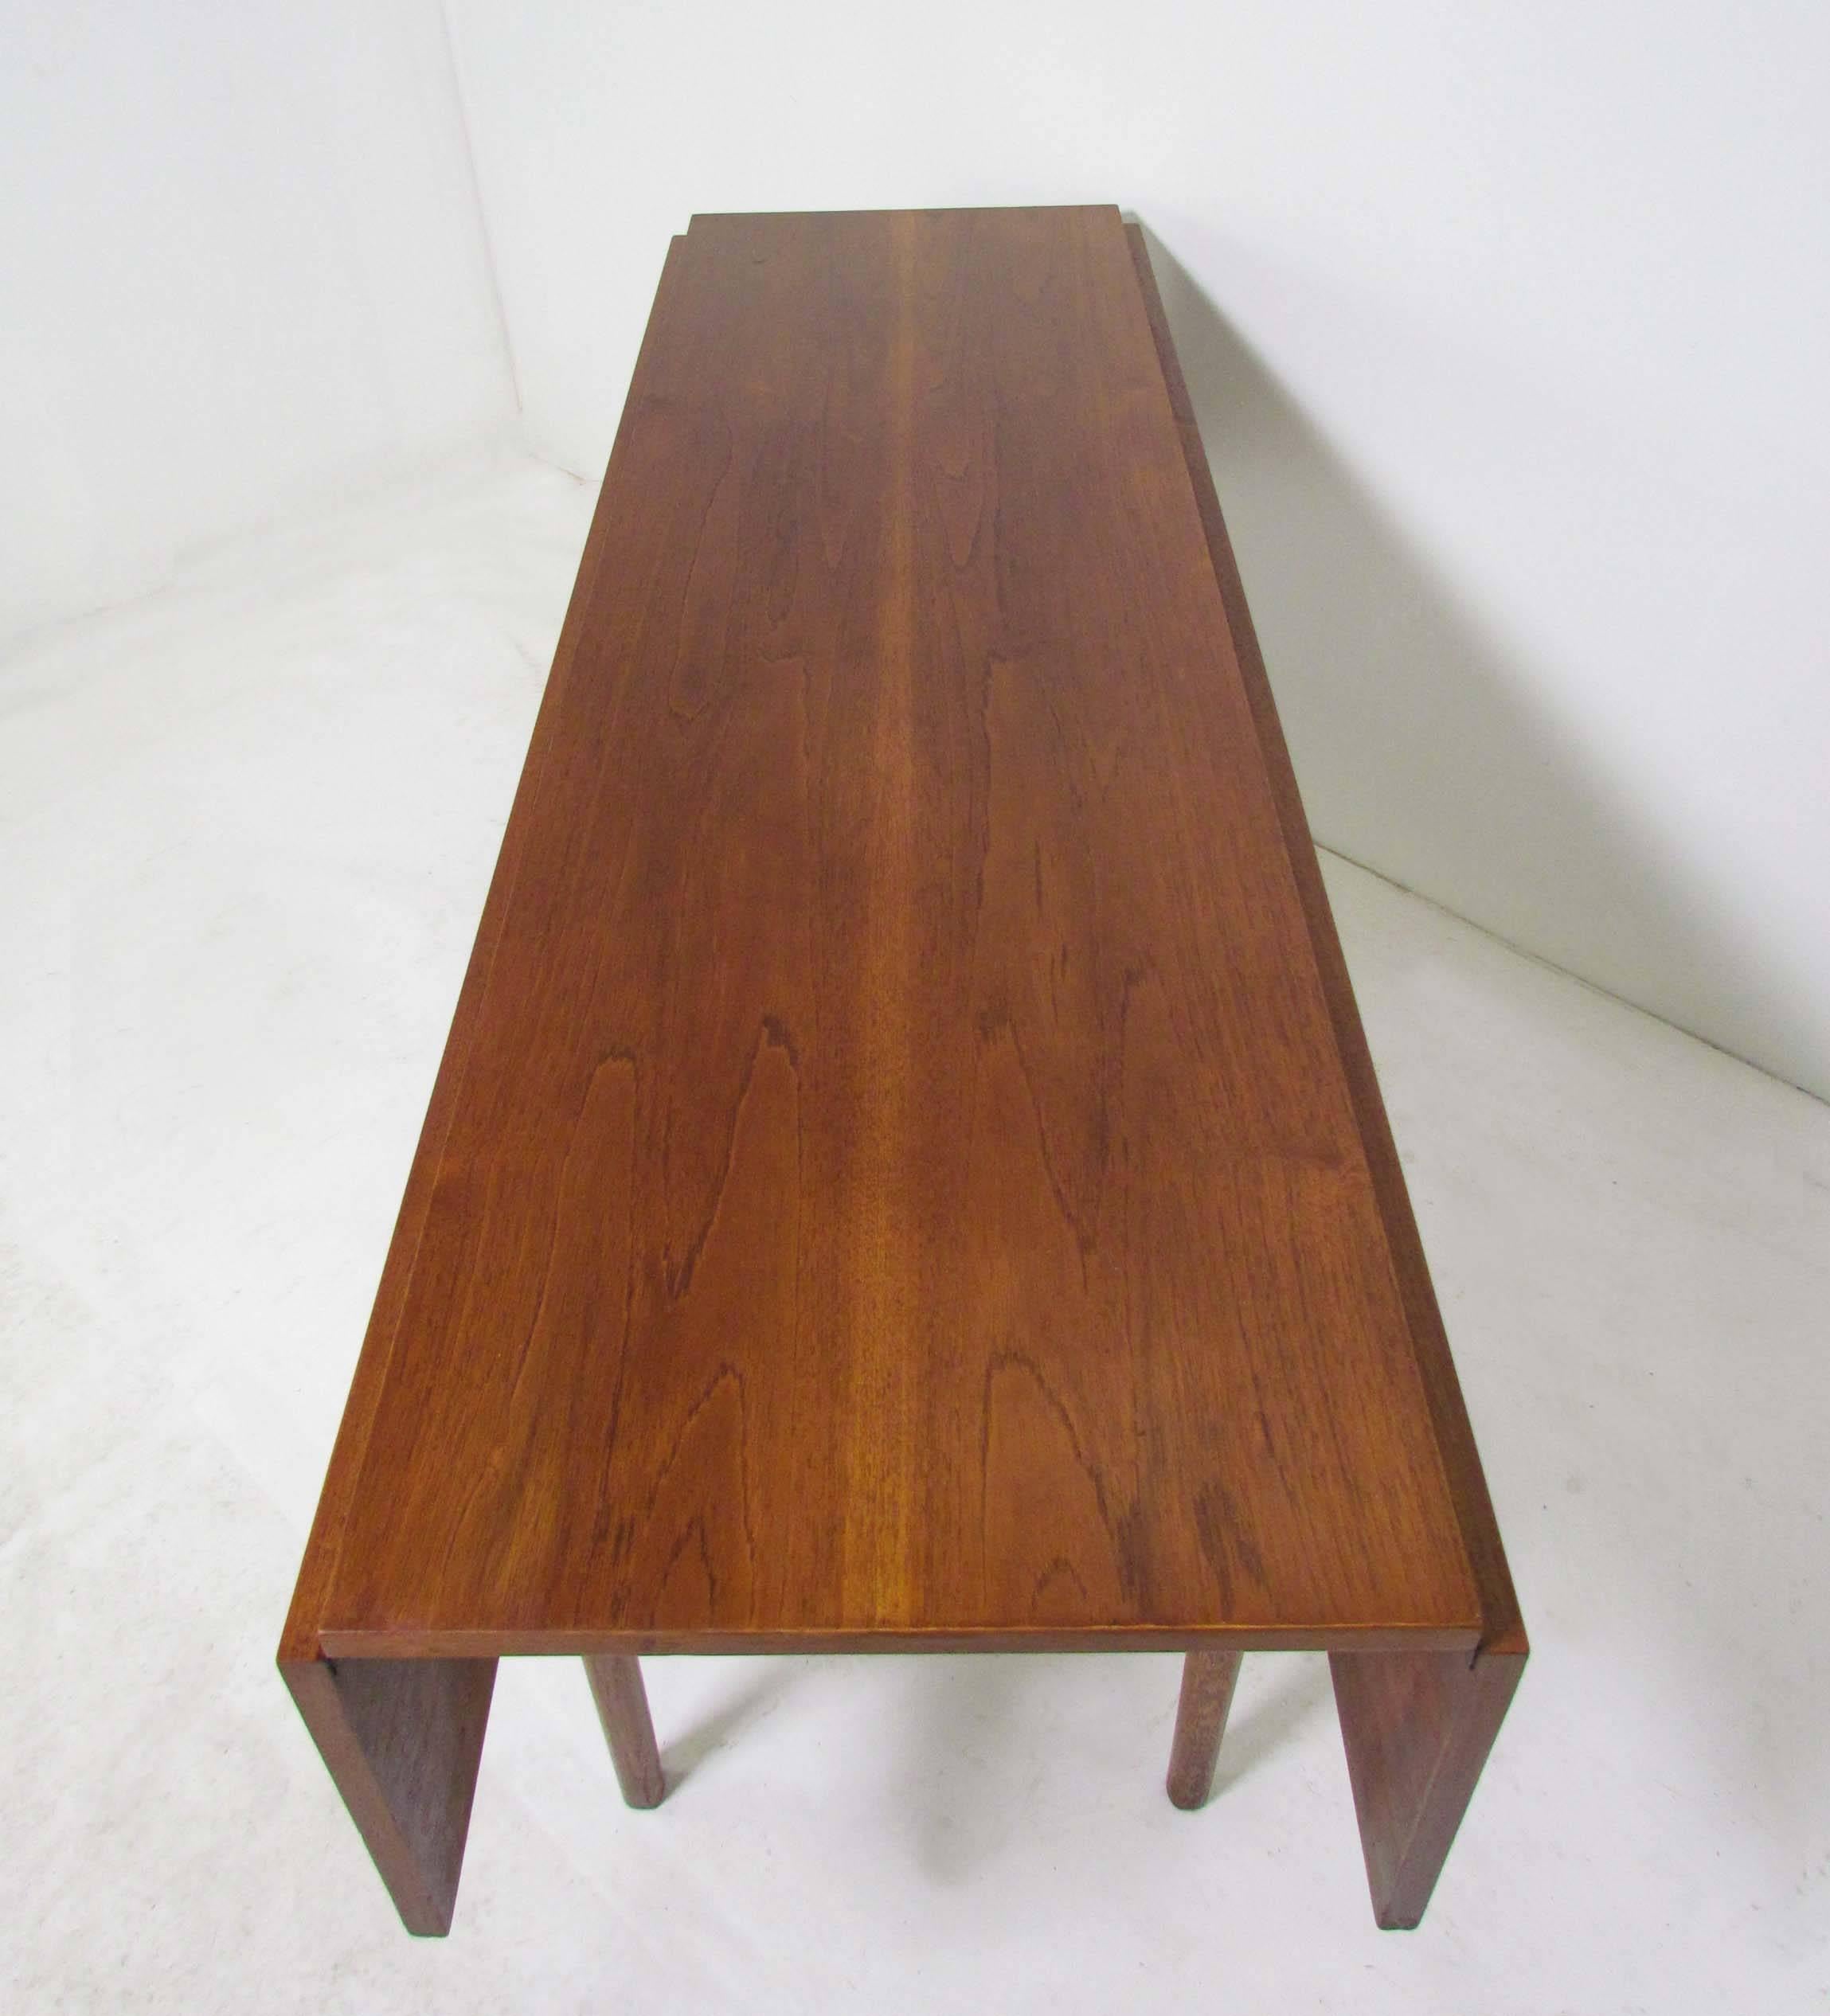 Danish teak Harvest style dining table with drop-leaf sides and slender carved oak legs and stretchers in the manner of Børge Mogensen, circa 1950s.

Measures 60